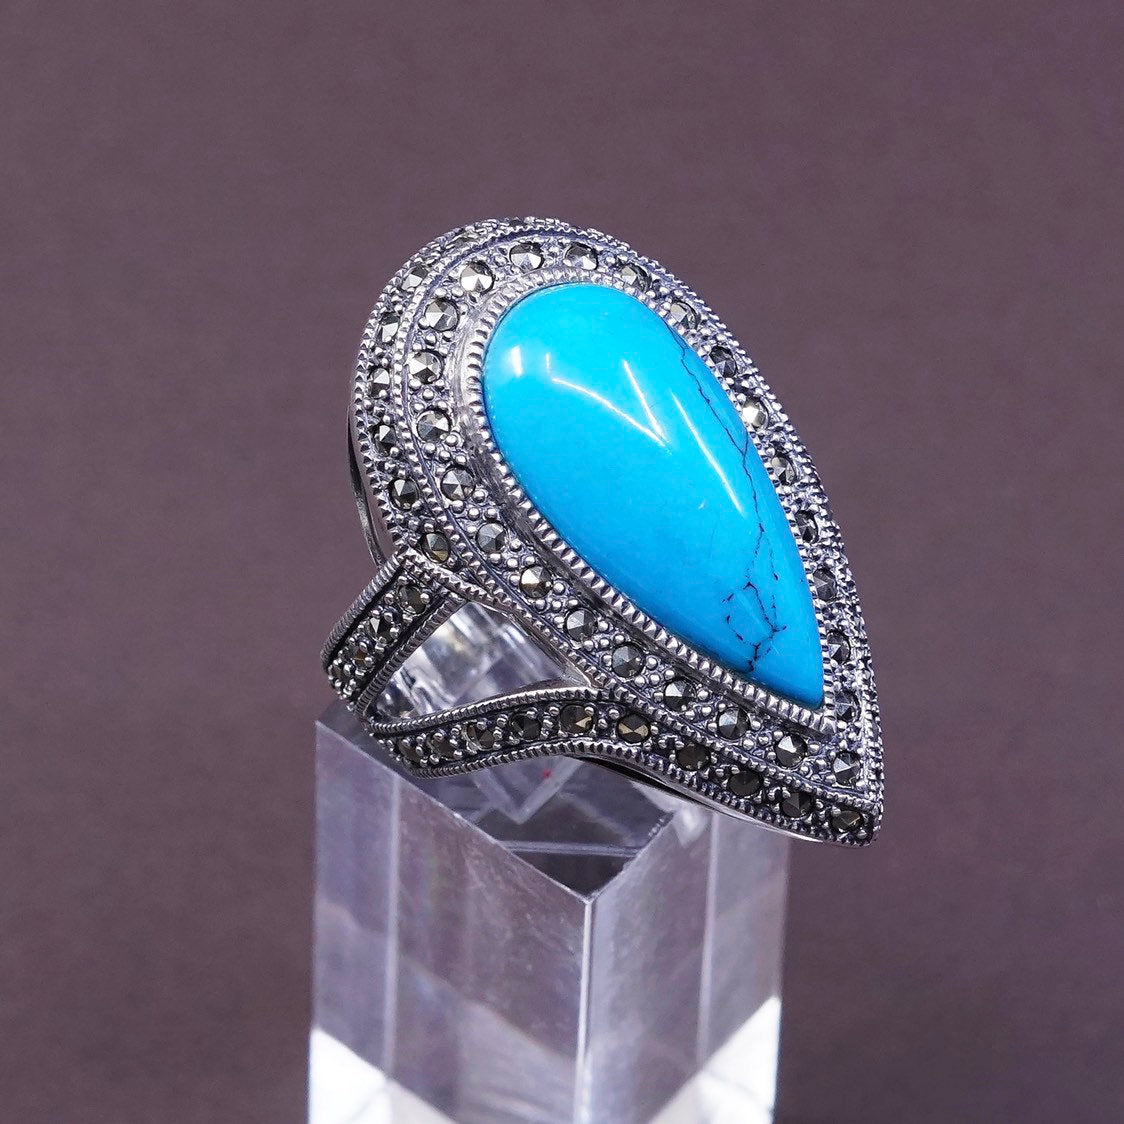 sz 7.25, Sterling silver handmade ring, 925 w/ teardrop turquoise and marcasite